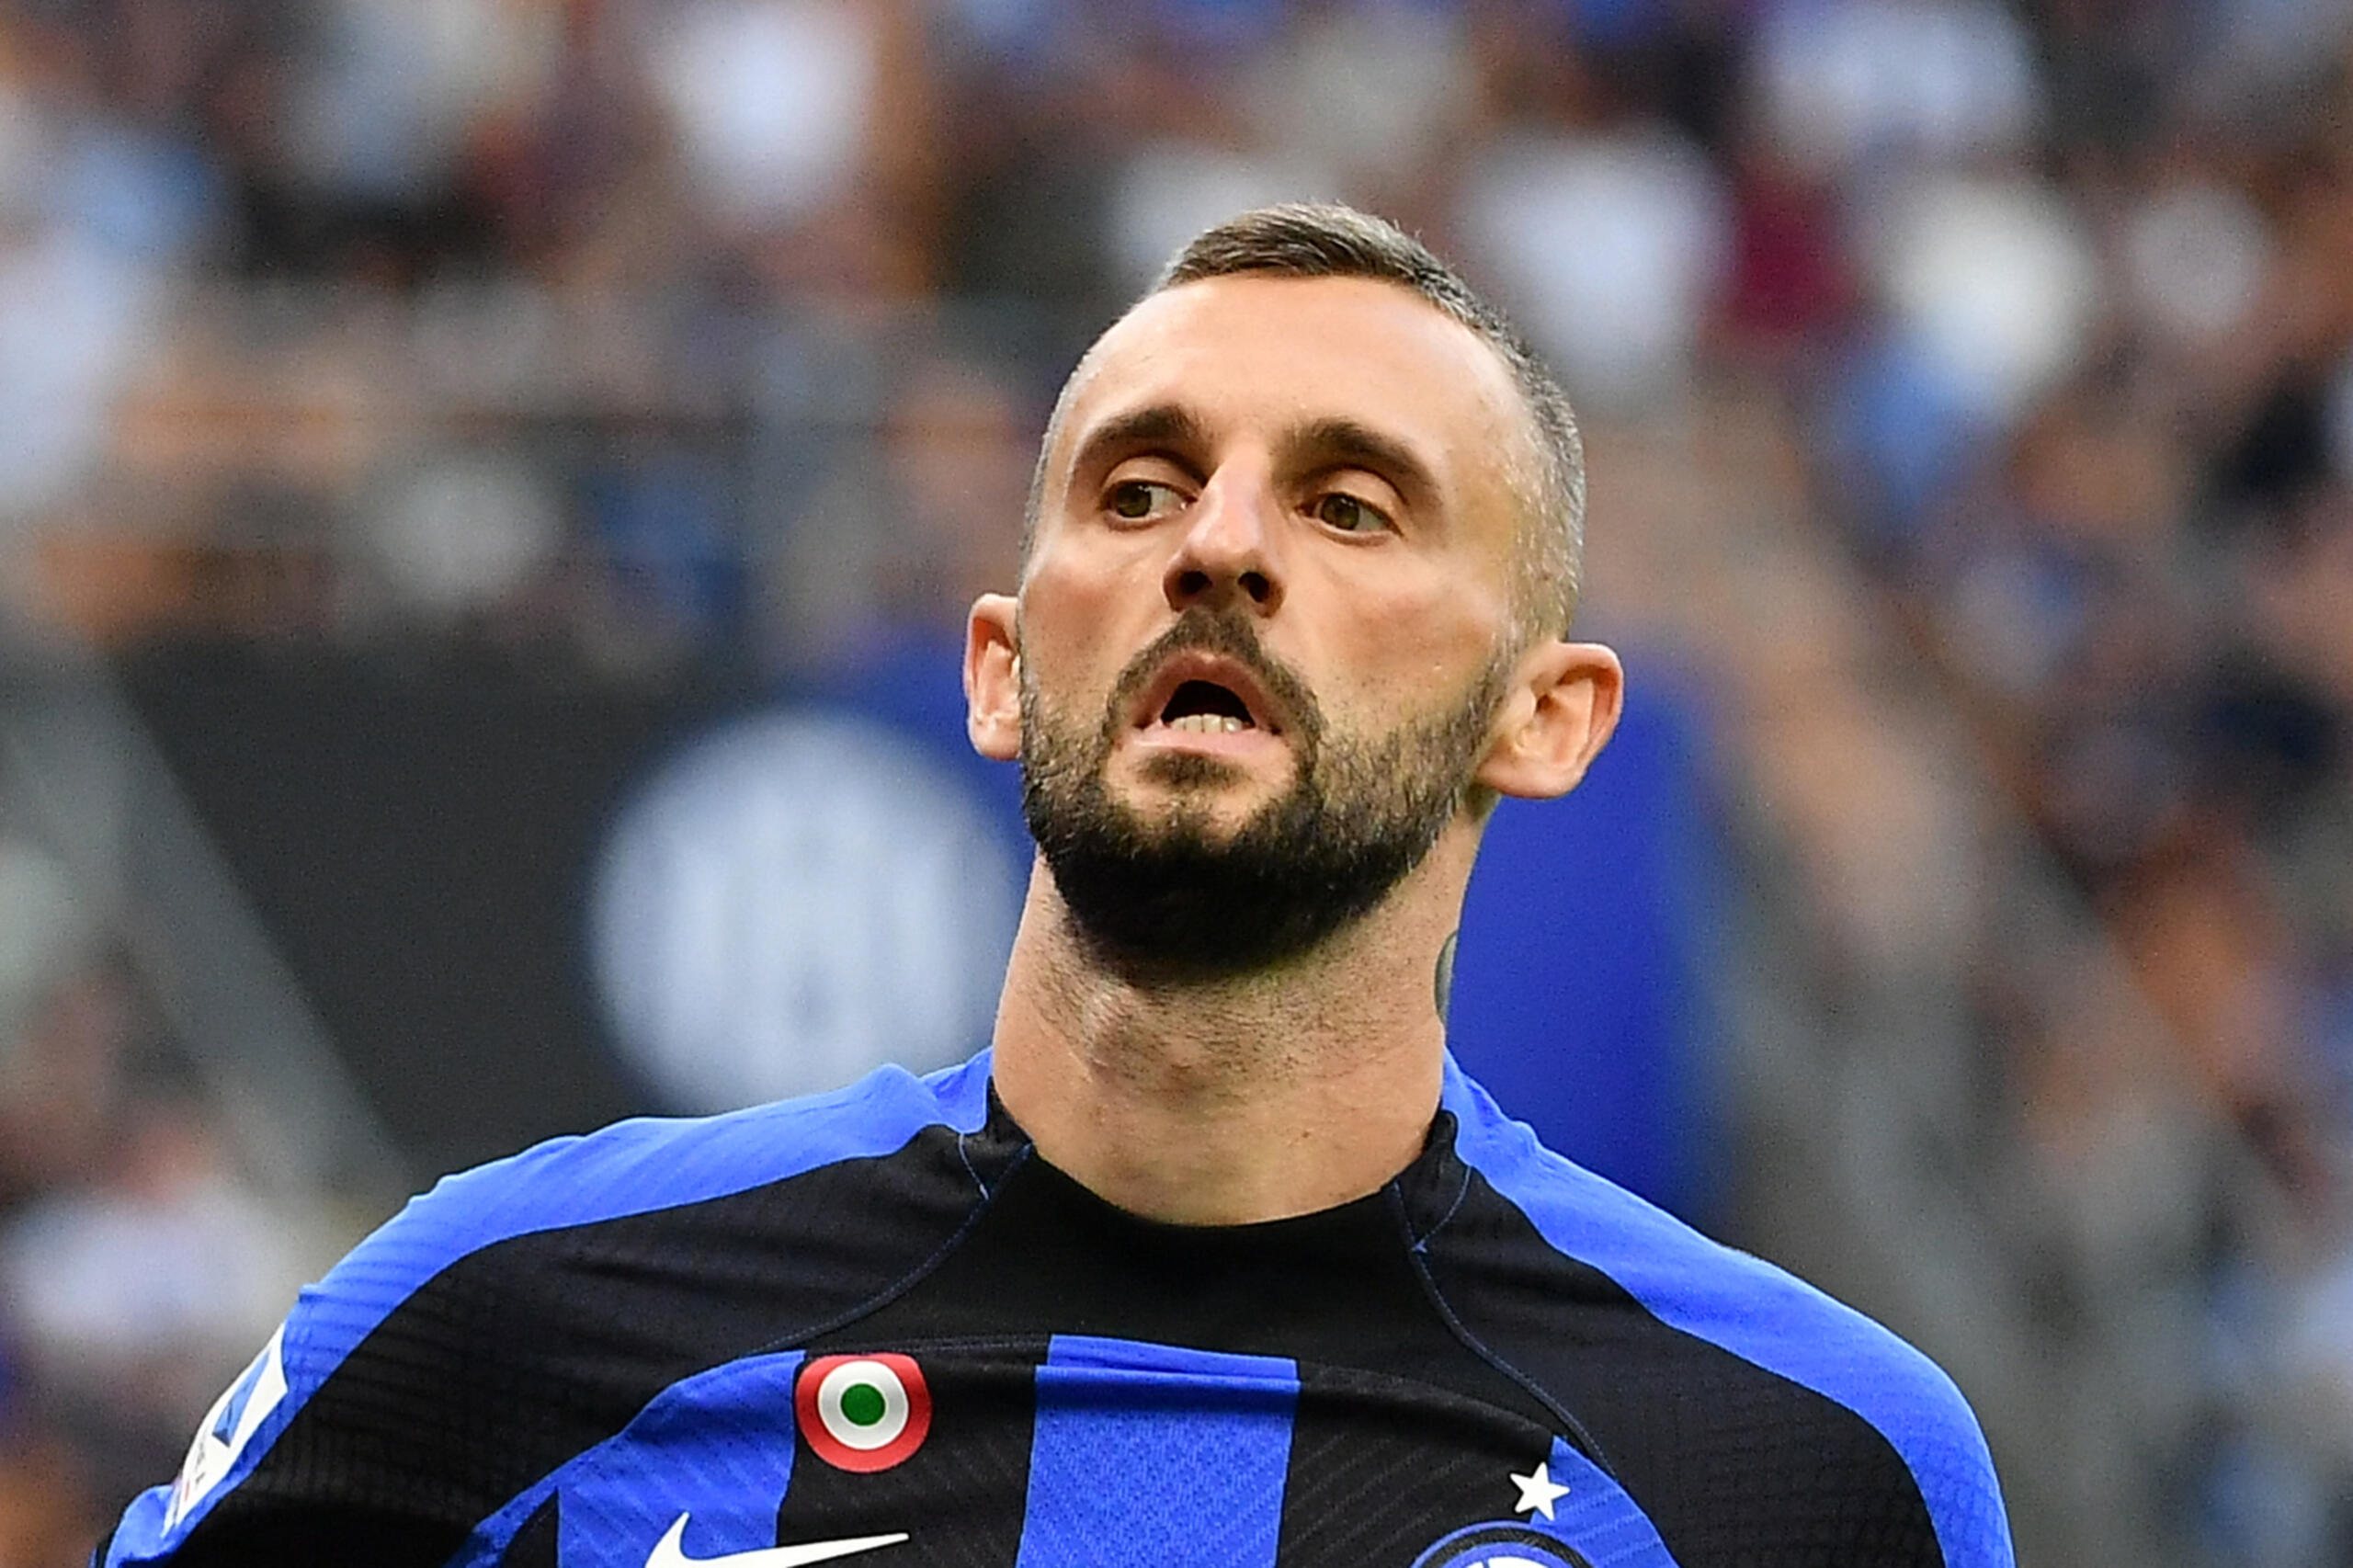 Inter and Al Nassr have reached agreement on a €23M fee for Marcelo Brozovic, but the player is buying time and upped his demands to move to Saudi Arabia.